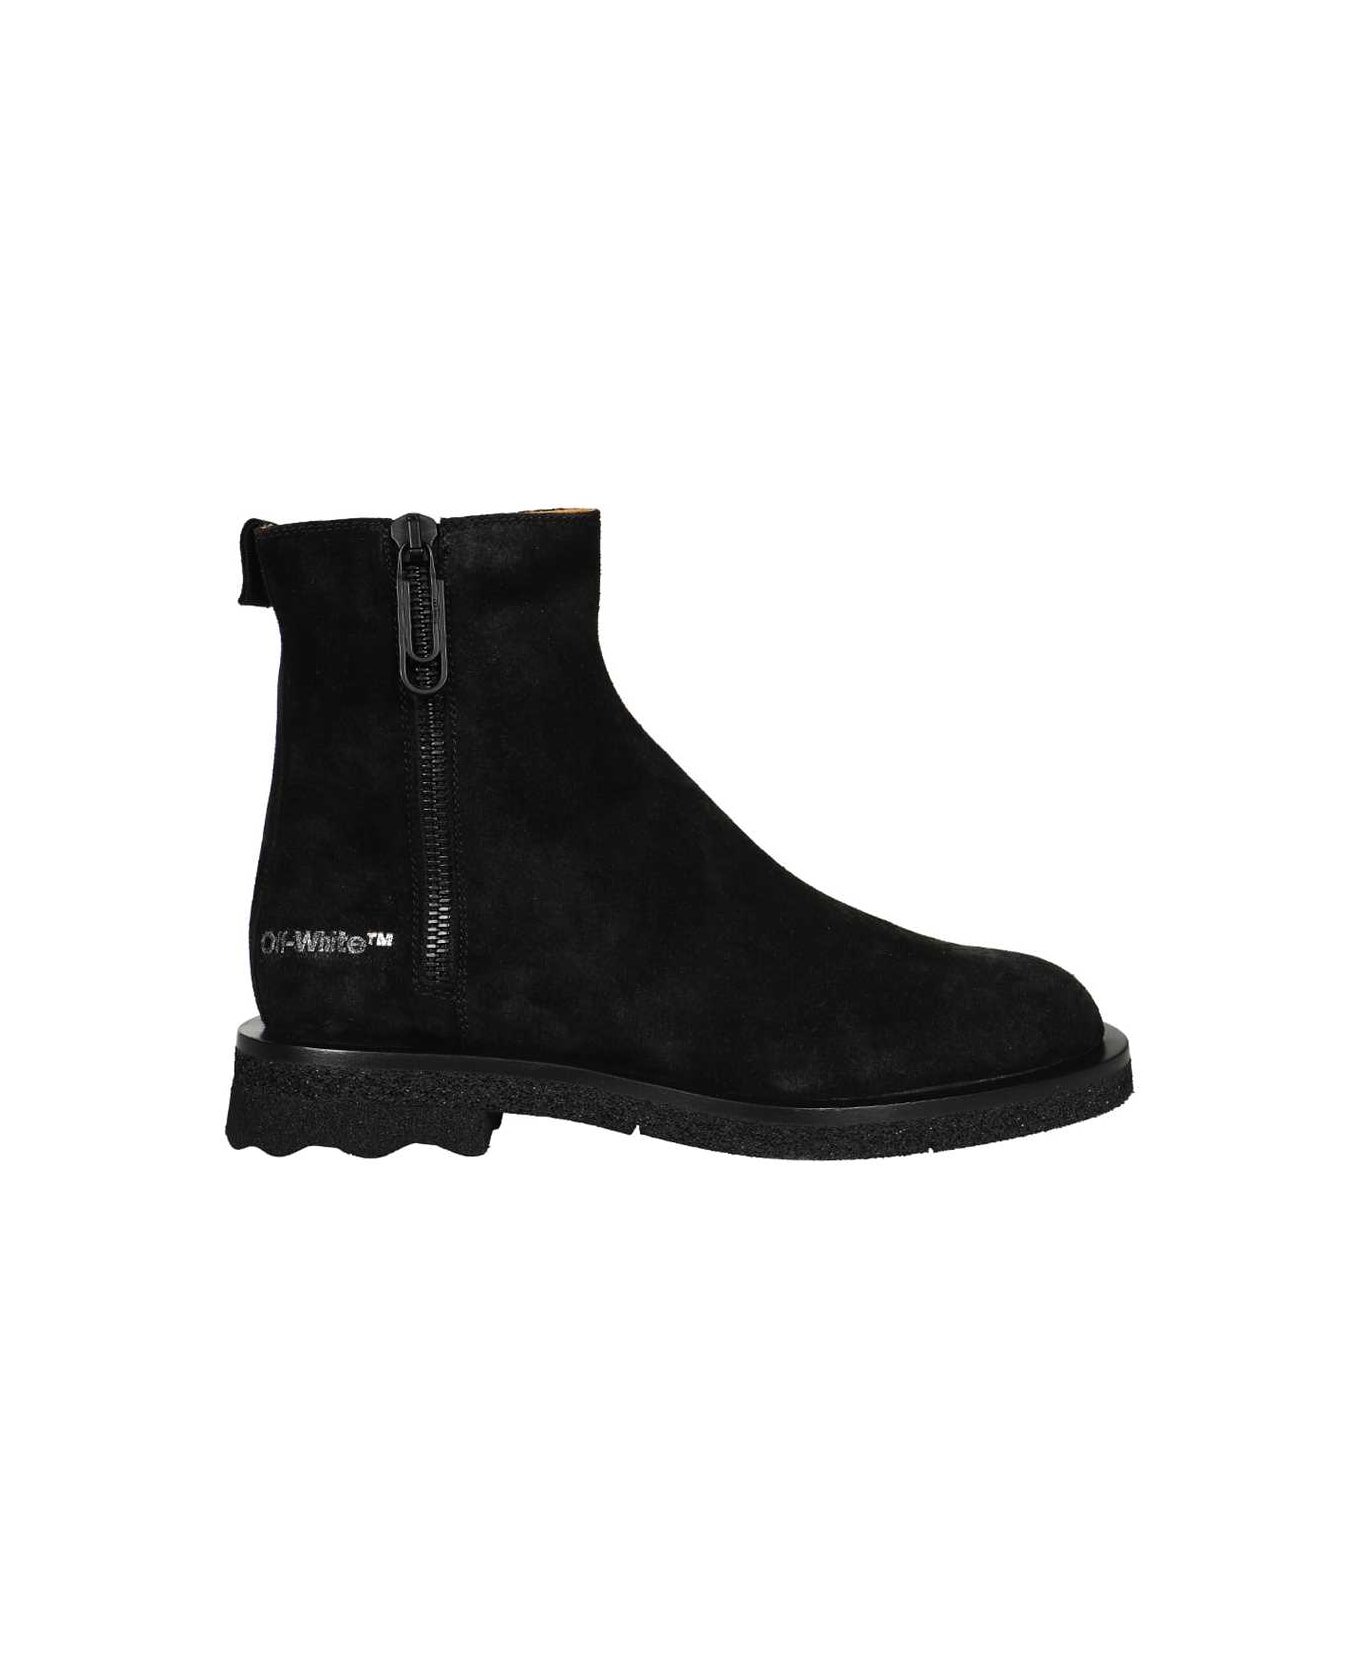 Off-White Spongesole Suede Ankle Boots - black